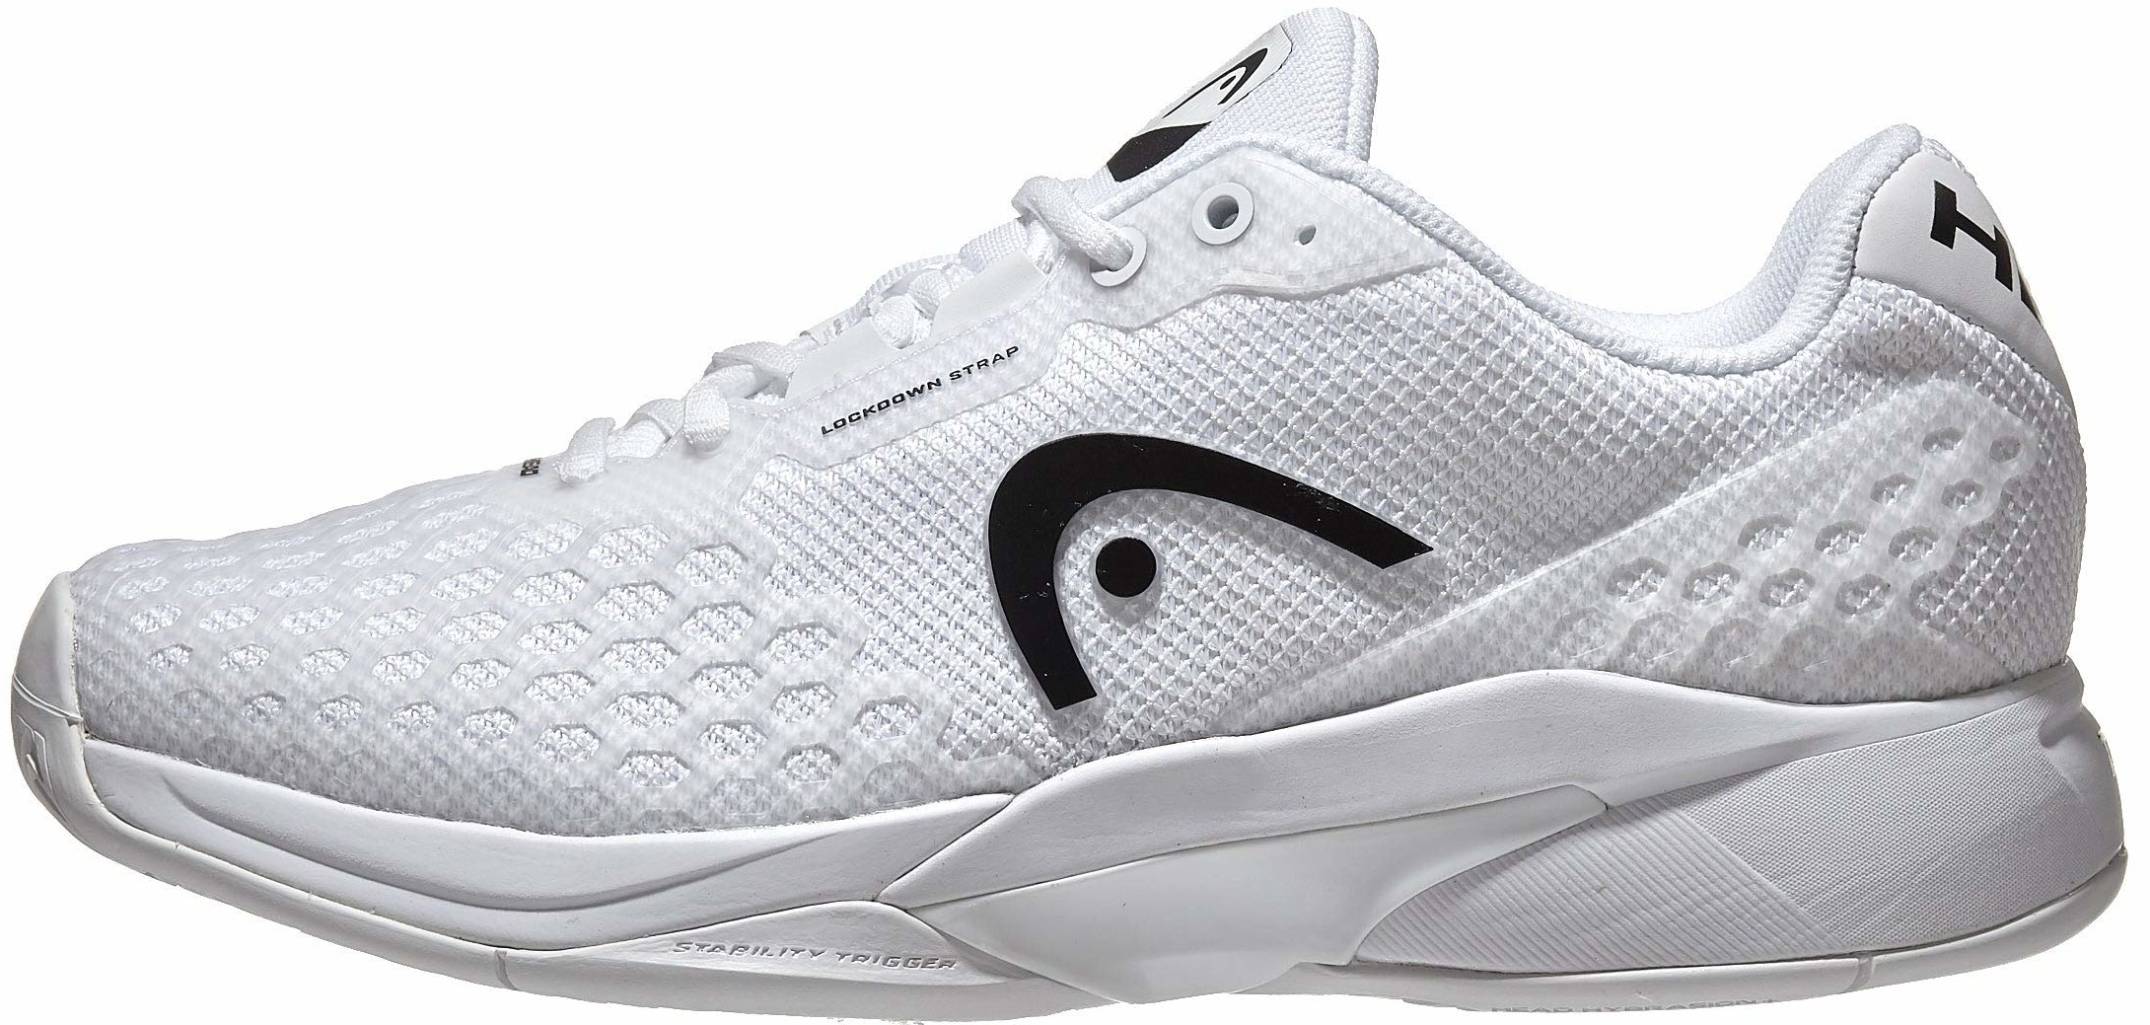 Details about   Head Mens Revolt Pro 3.0 Tennis Shoes Cooling System White Sneakers Sizes 7-14 